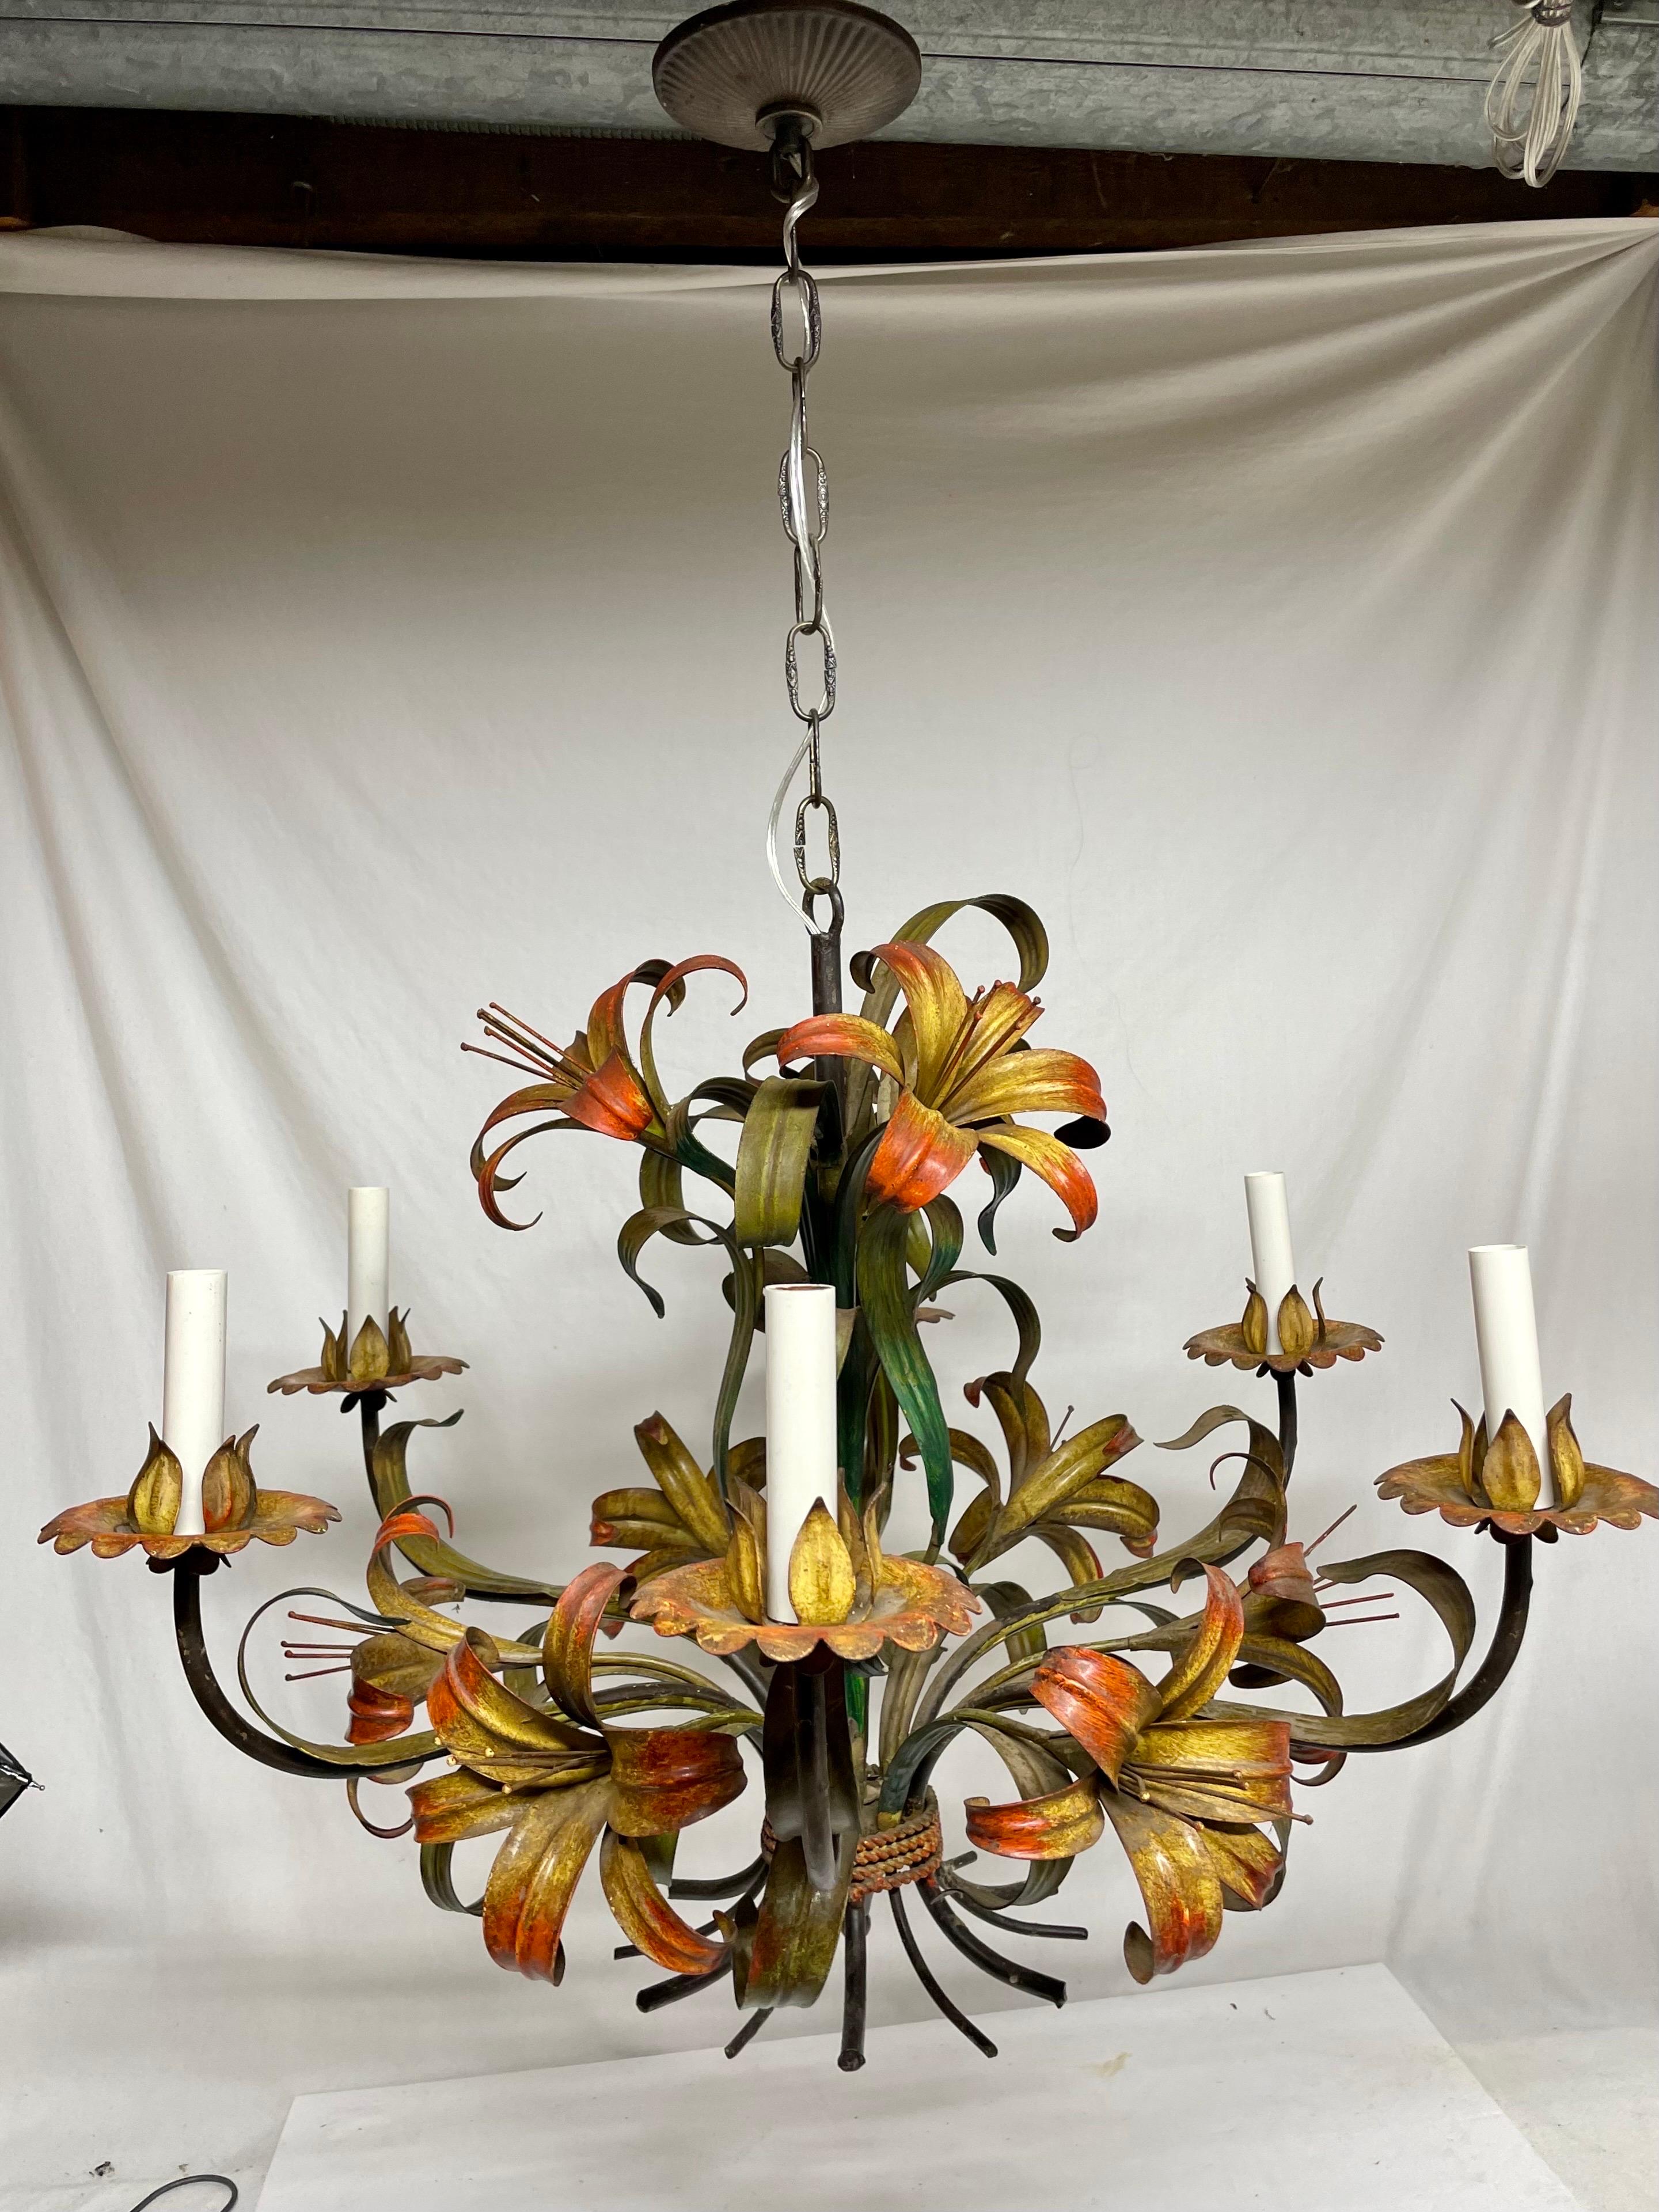 Large scale Italian floral tole six arm chandelier. Lots of  Lilly flowers in yellows and reds with green leaves. Slight chipping paint that adds to the character. Rewired with x long wire if more length is desired and in good working condition.